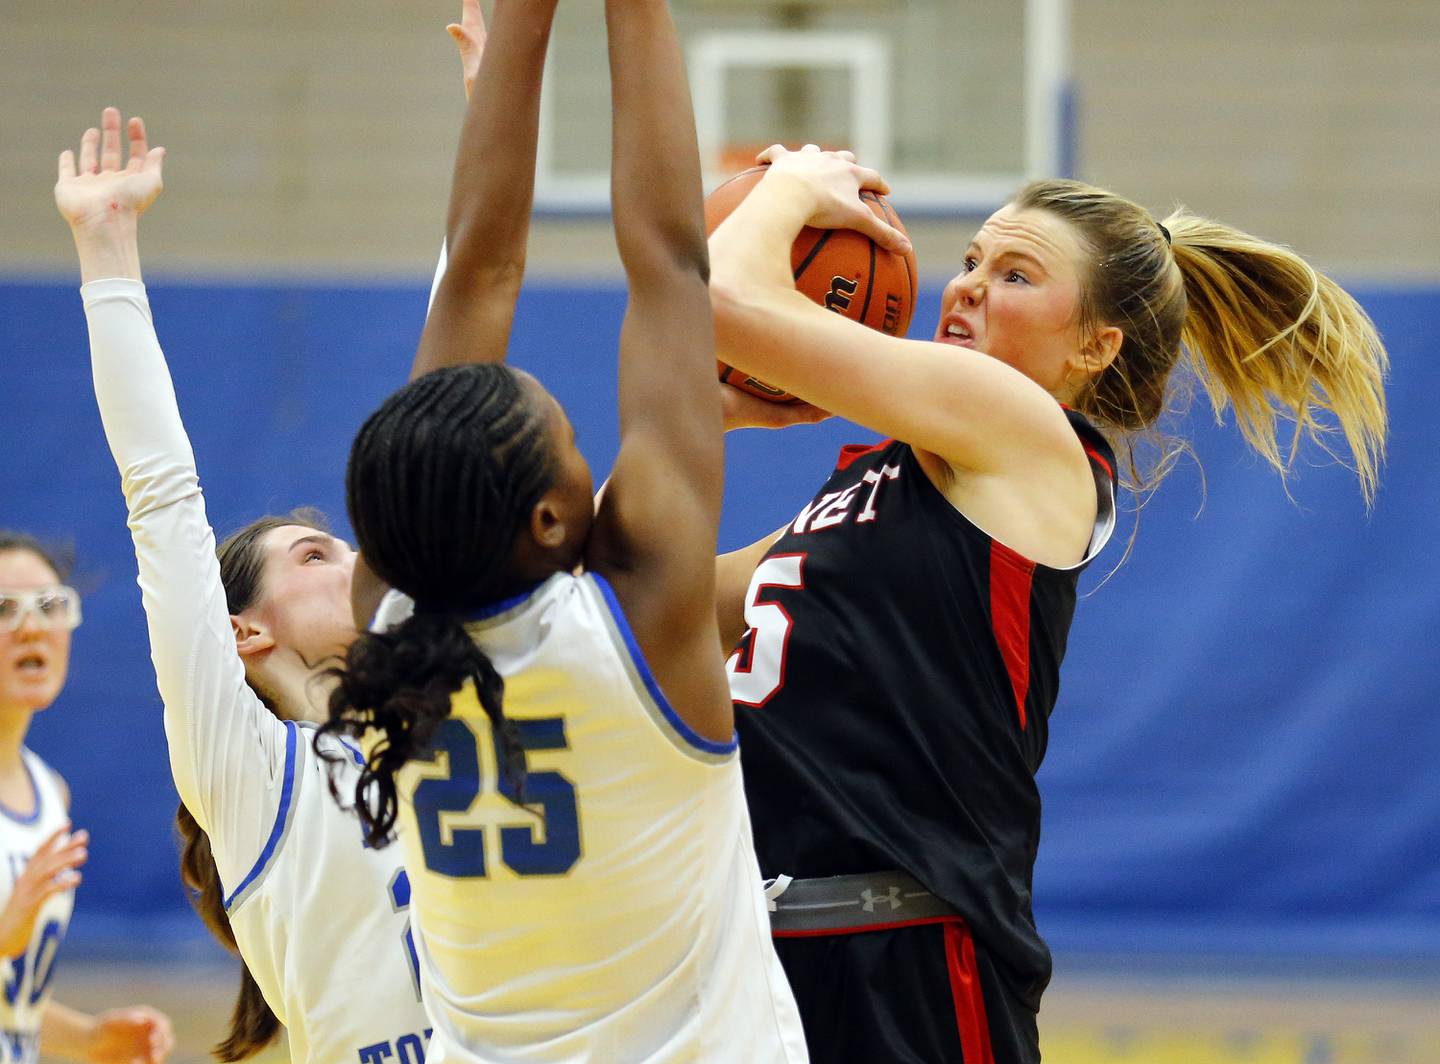 Benet's Lenee Beaumont (5) goes up against Lyons' defense during the girls varsity basketball game between Benet Academy and Lyons Township on Wednesday, Nov. 30, 2022 in LaGrange, IL.